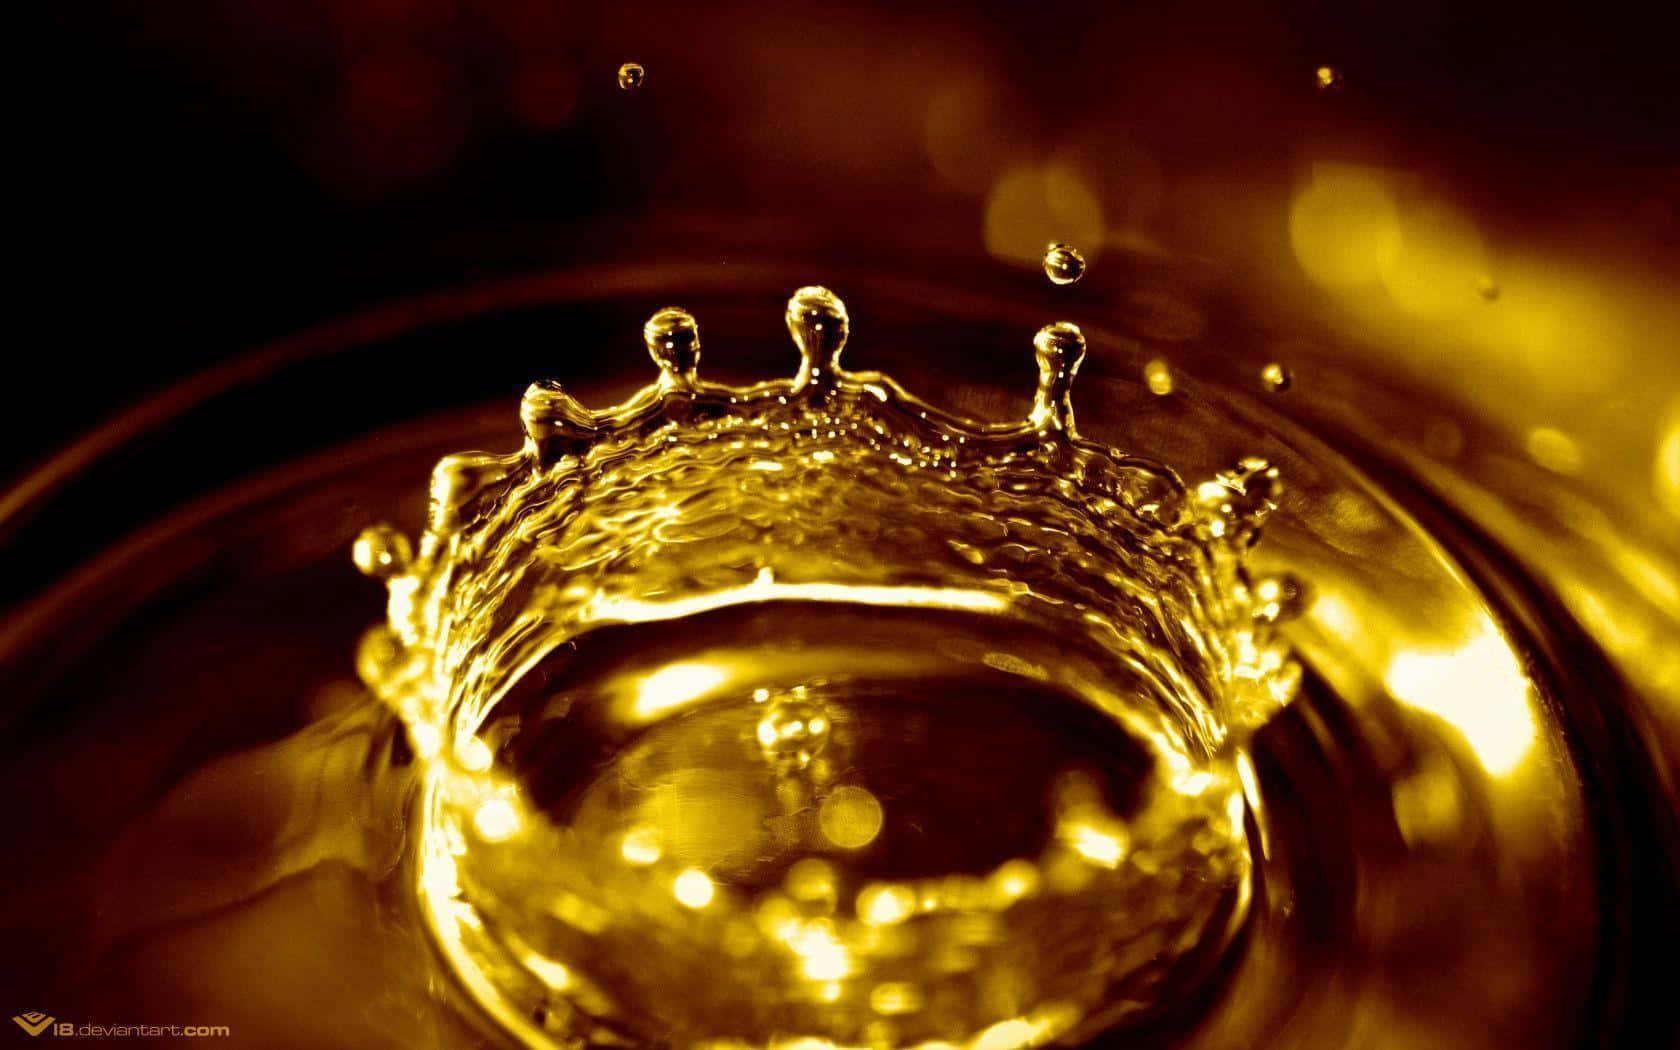 A Close Up Of A Gold Crown In A Glass